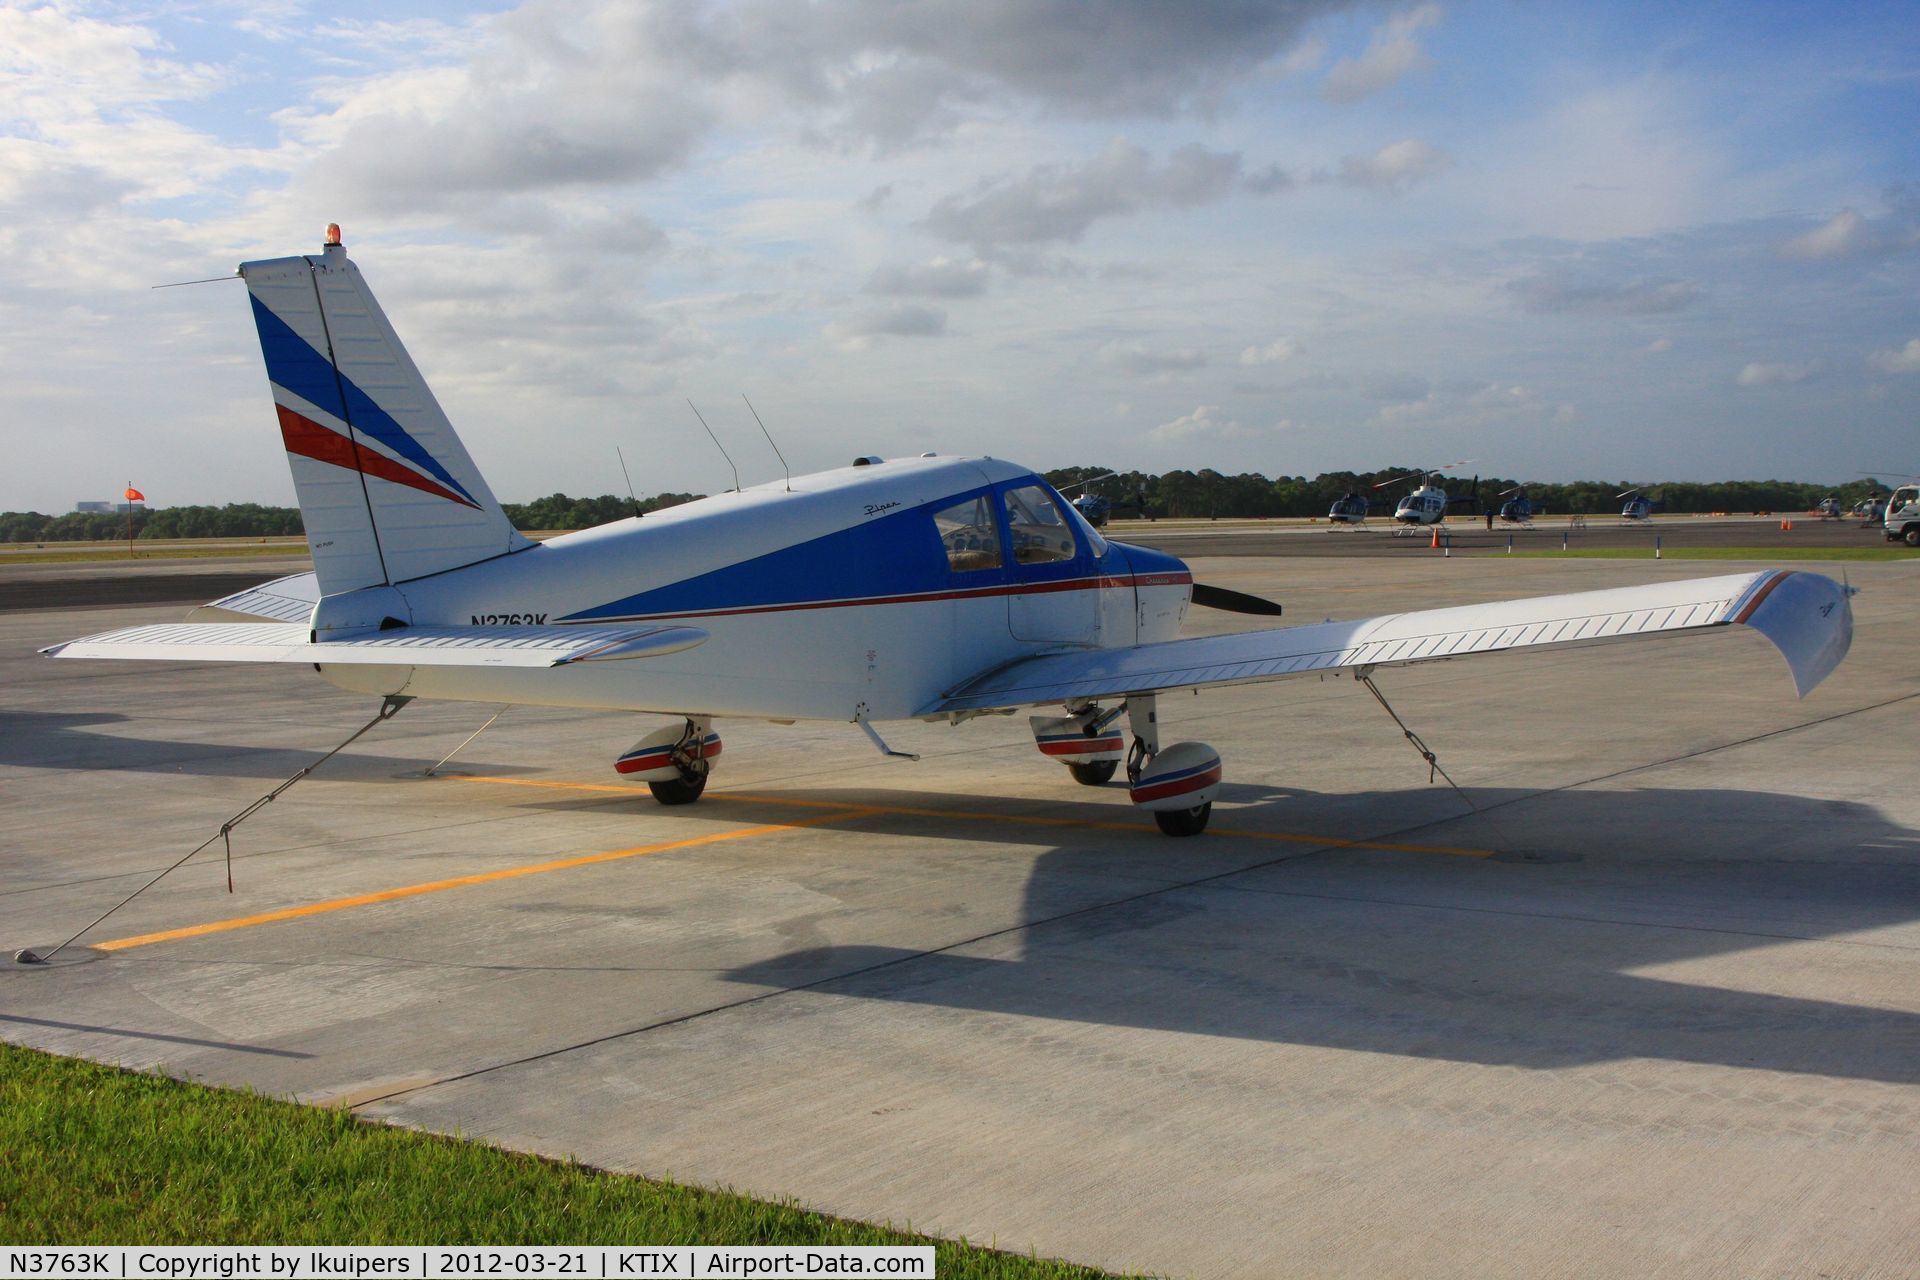 N3763K, 1967 Piper PA-28-140 C/N 28-23722, At Titusville Space Coast Airport